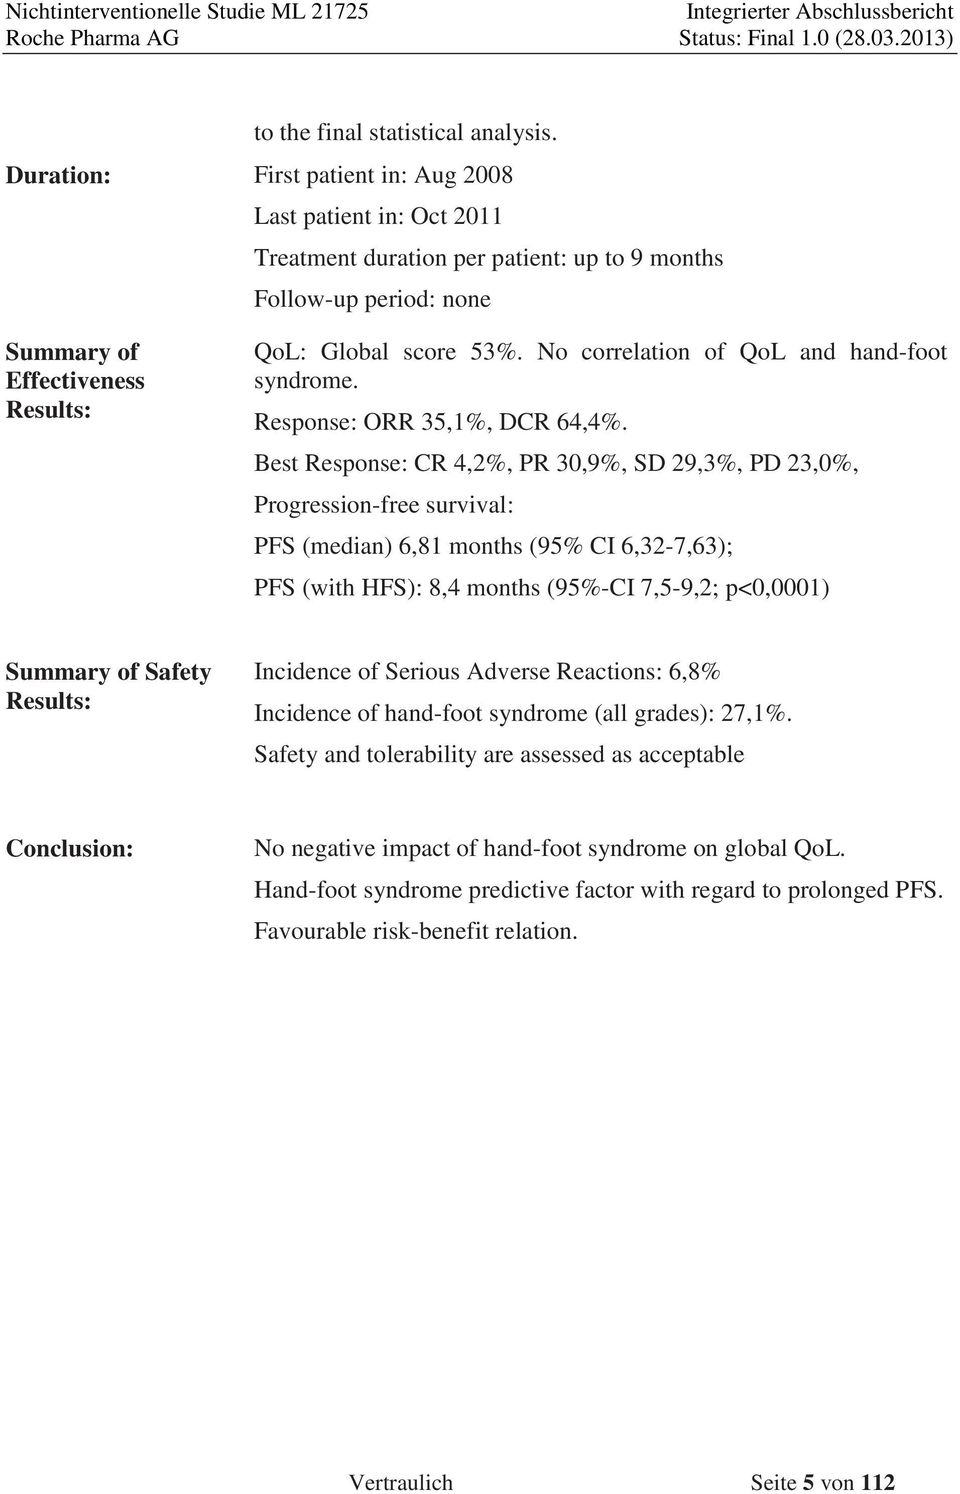 No correlation of QoL and hand-foot syndrome. Response: ORR 35,1%, DCR 64,4%.